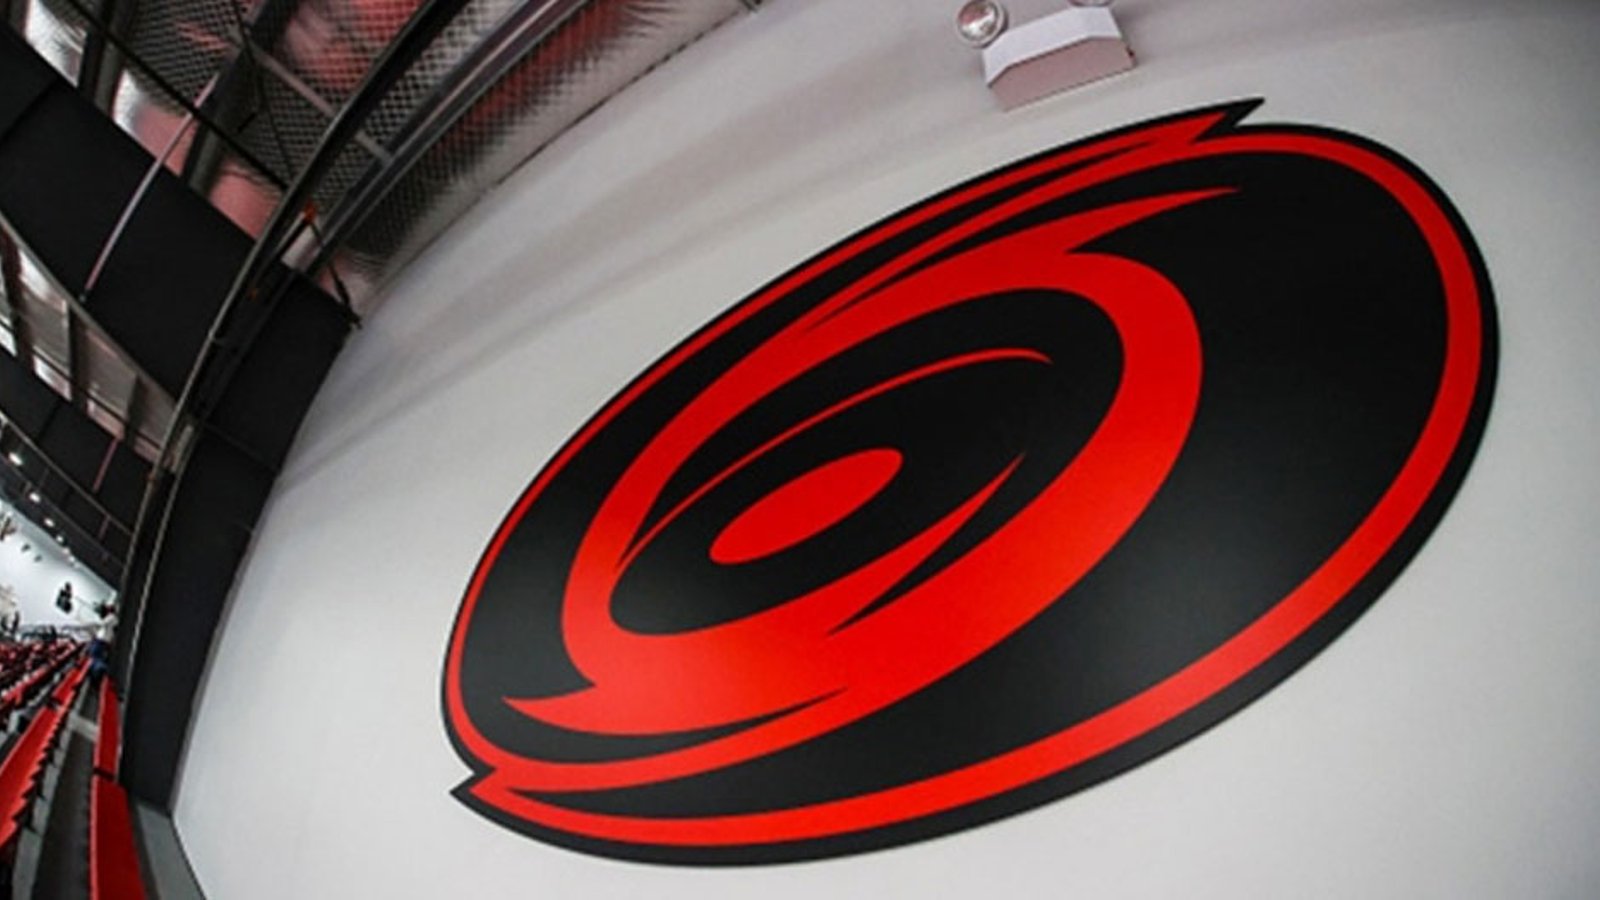 The Hurricanes have reportedly hired their next GM